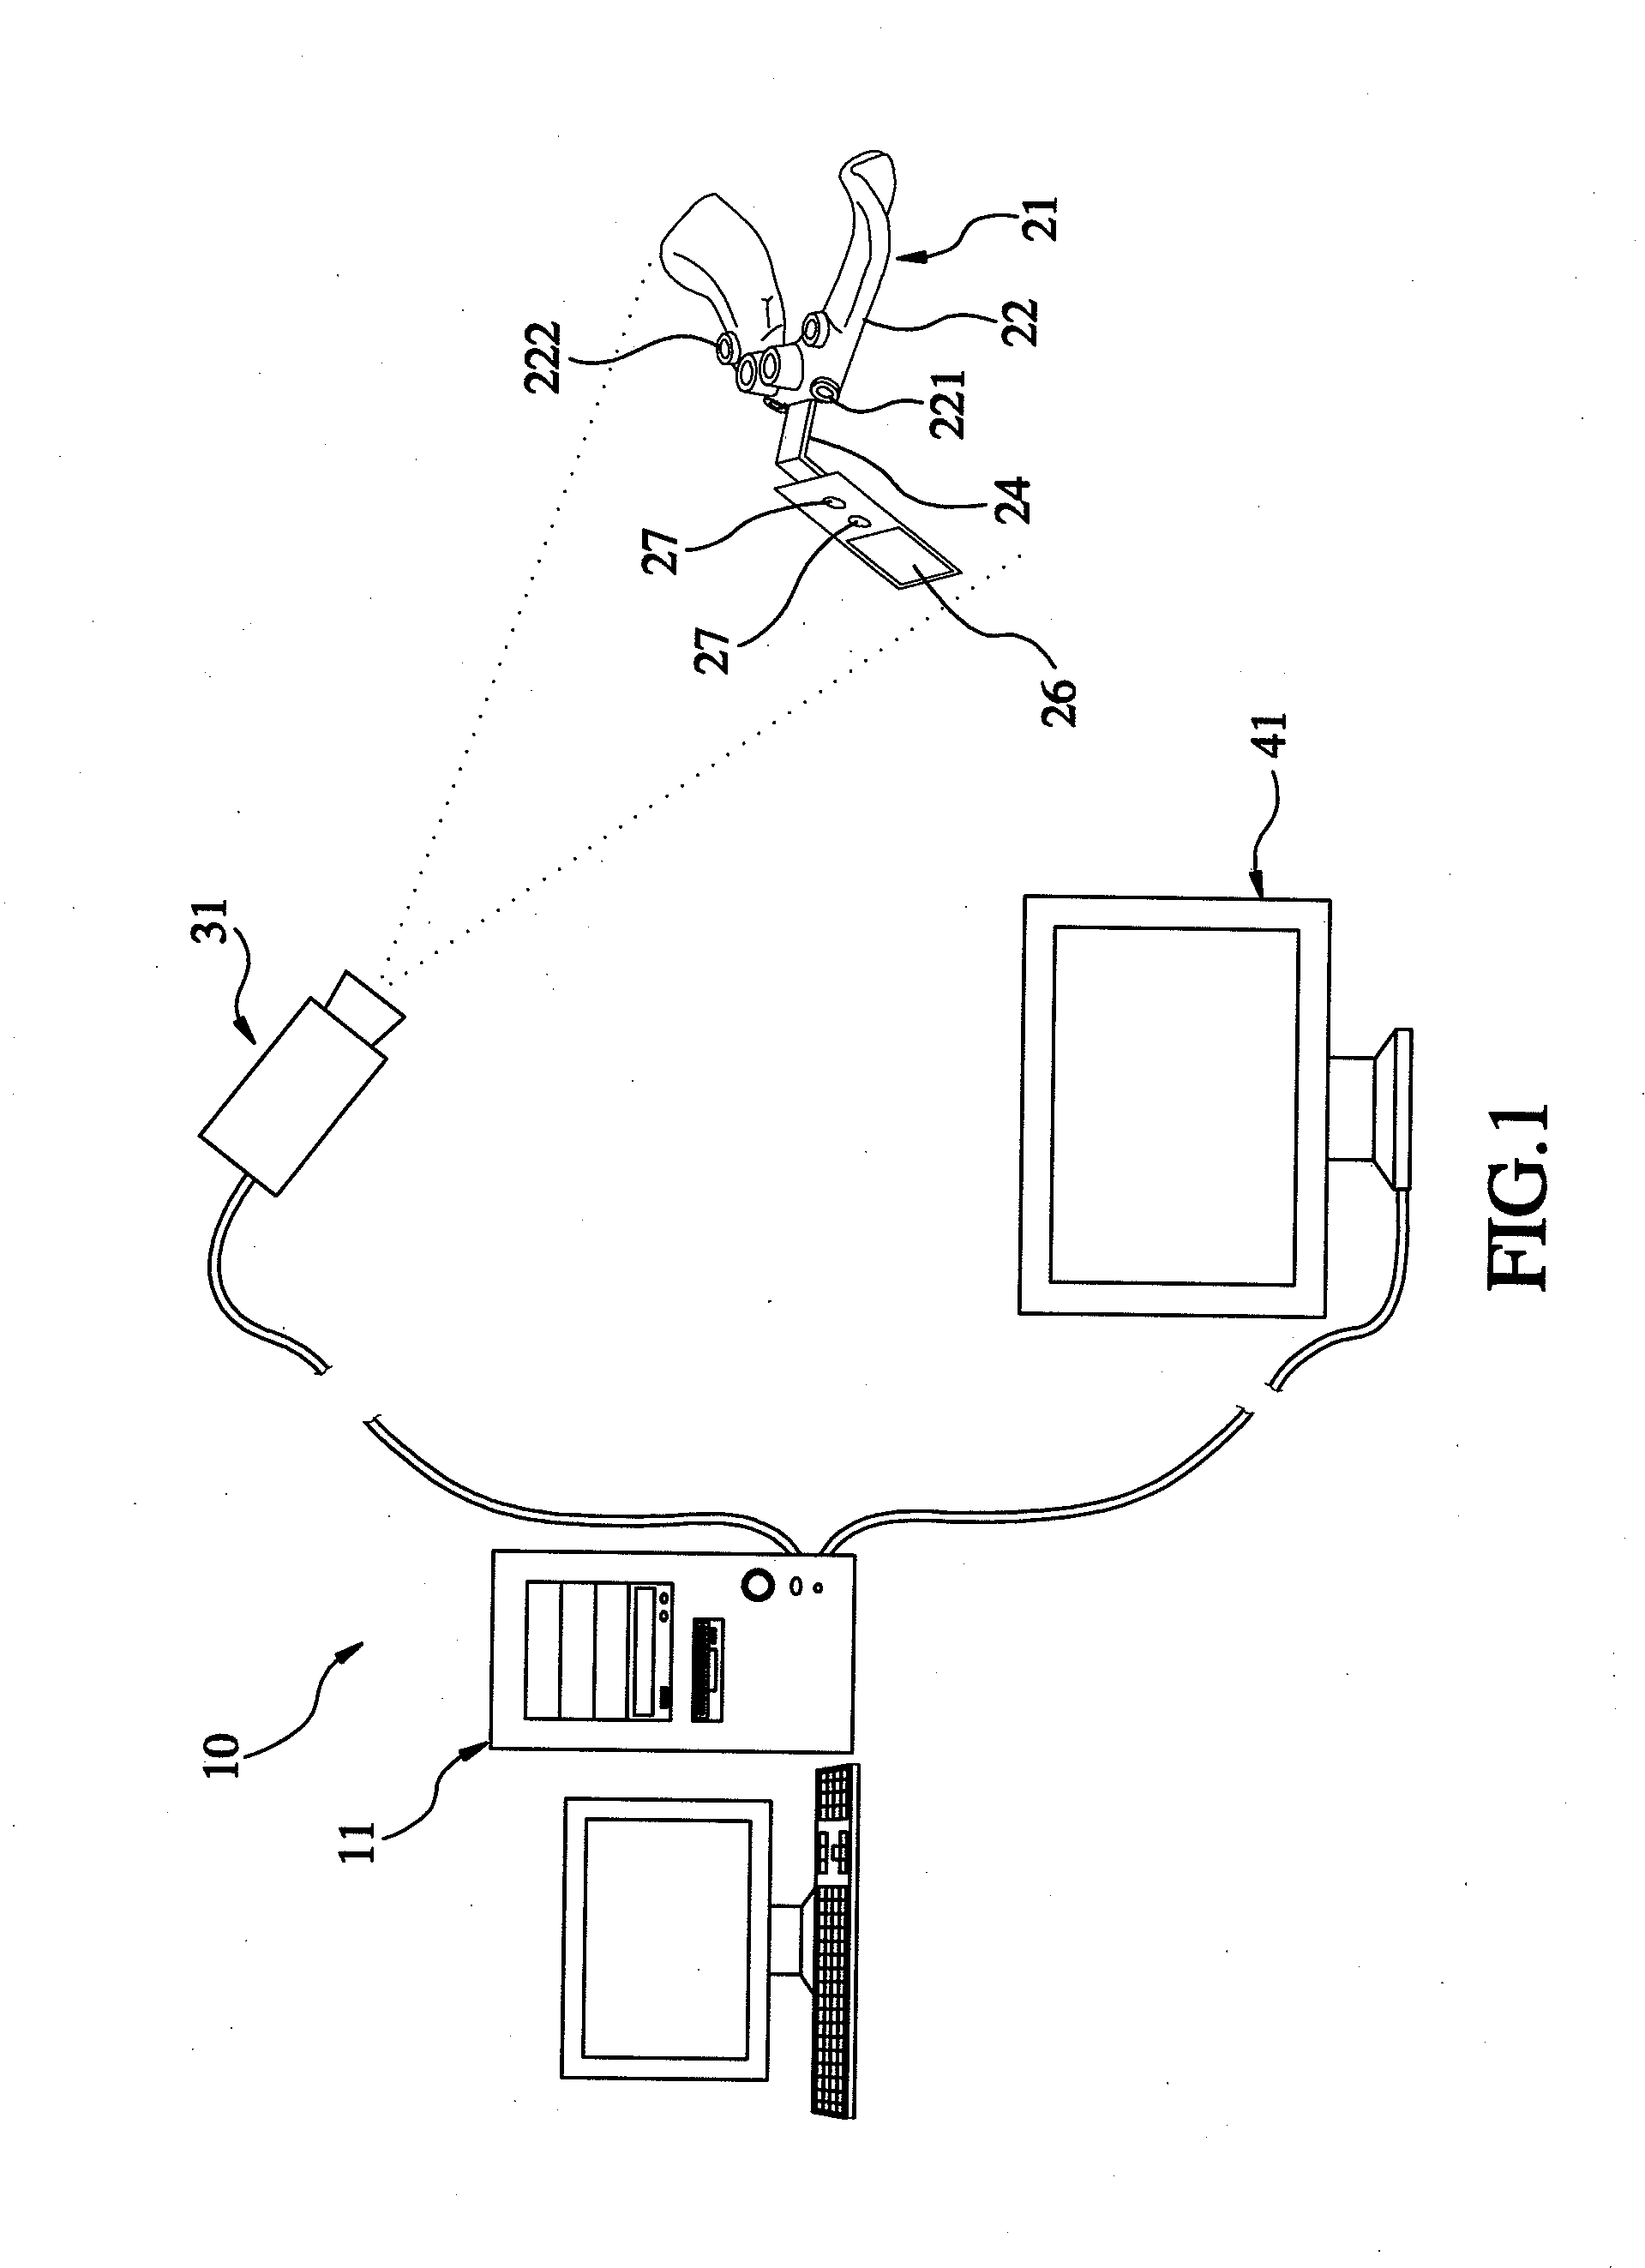 Computer-aided positioning and navigation system for dental implant